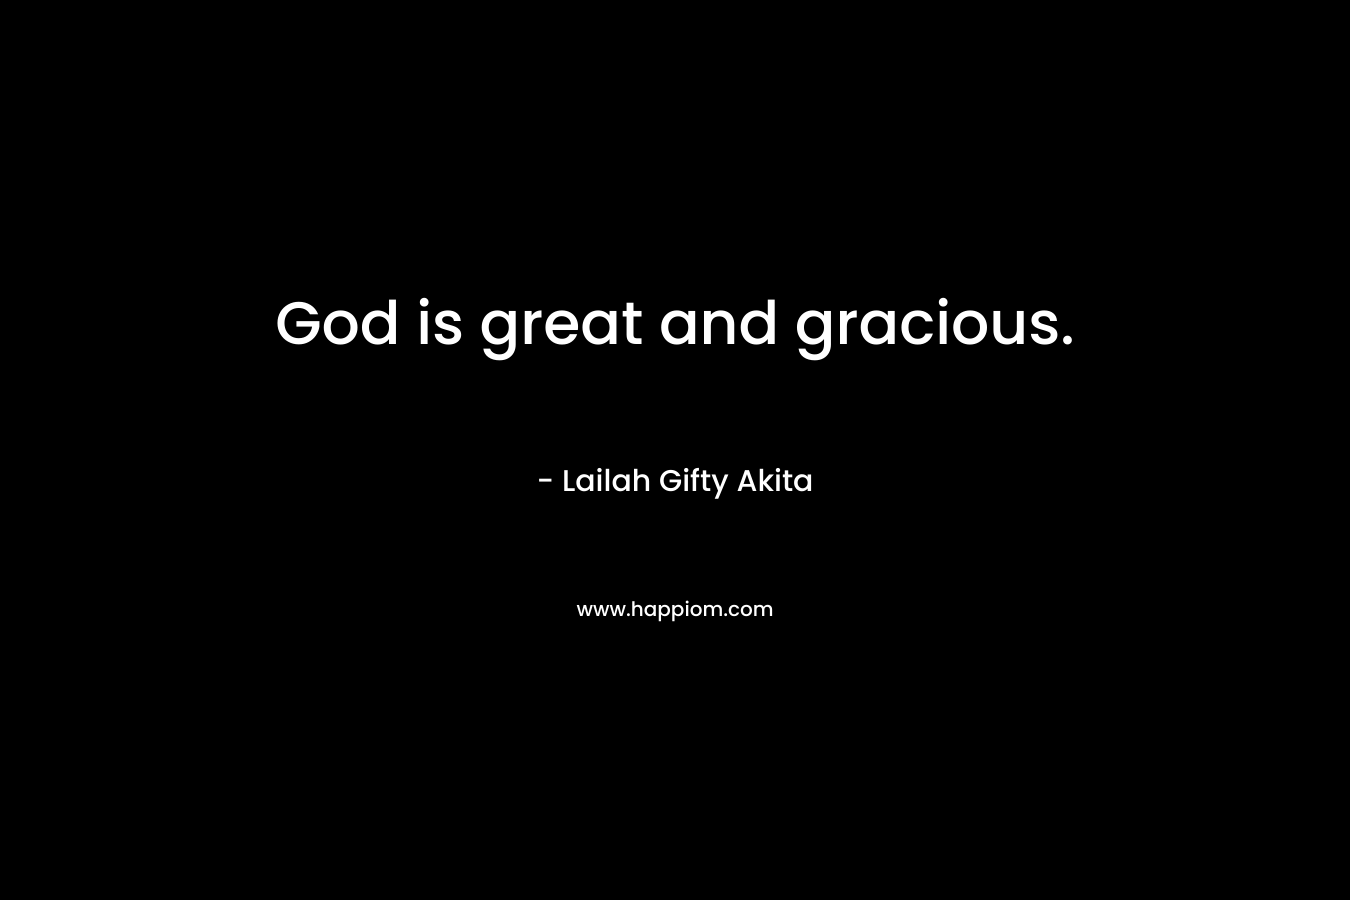 God is great and gracious.